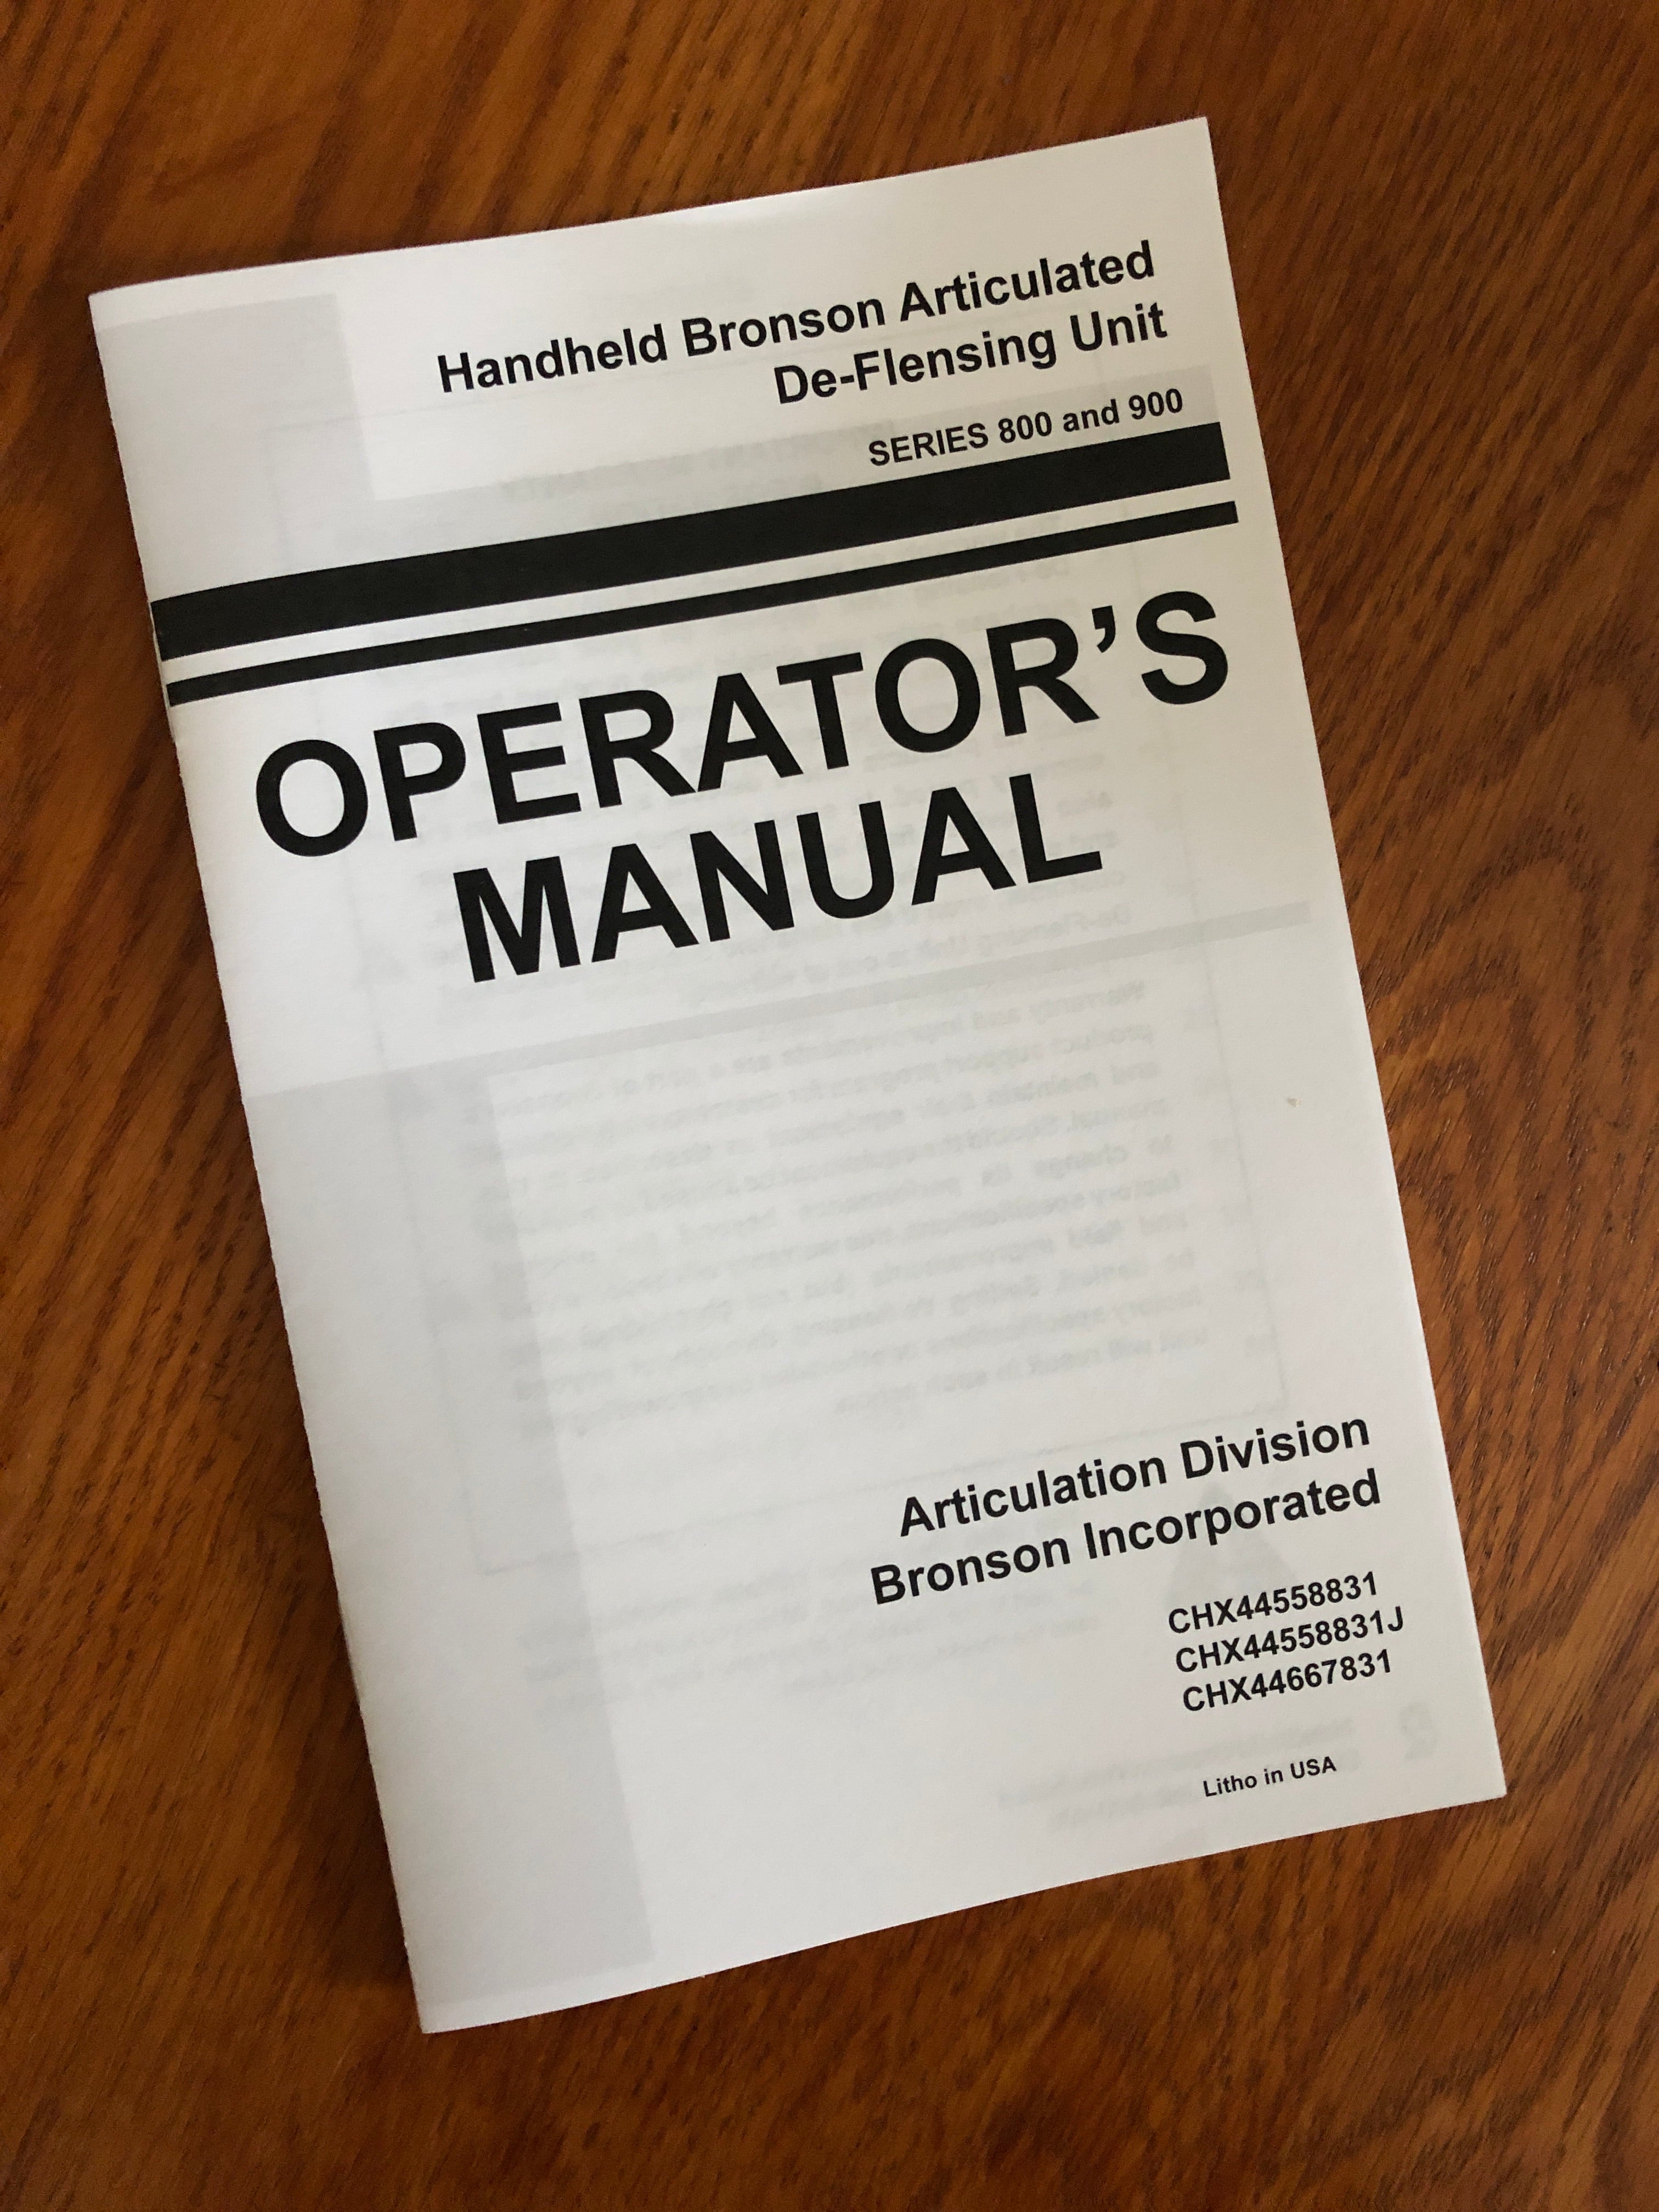 Operator's Manual for the Handheld Bronson Articulated De-Flensing Unit: A Game